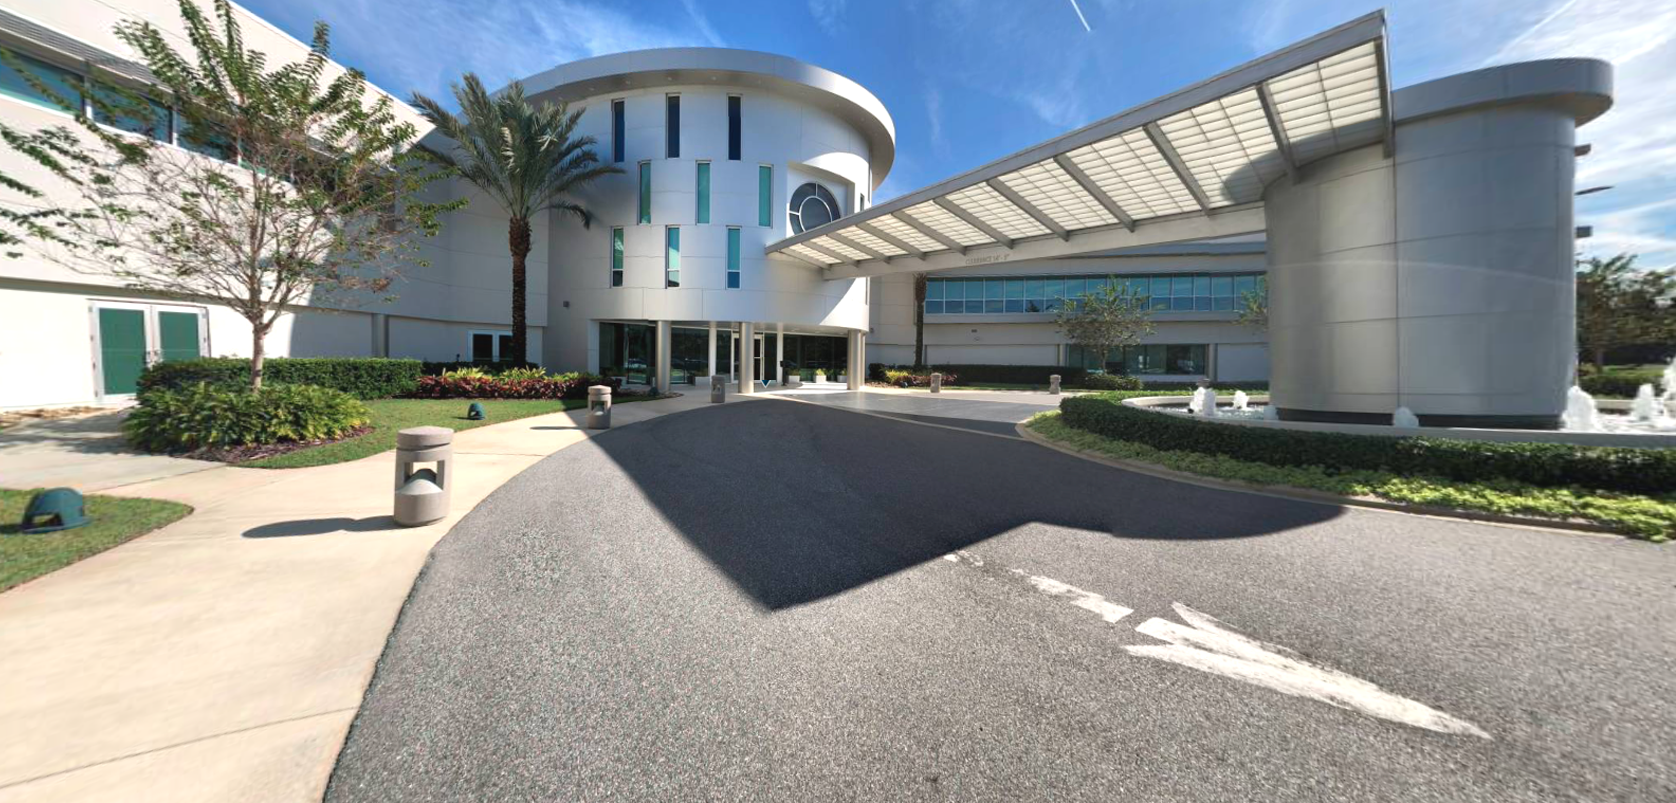 Satcom Direct World Headquarters in Melbourne FLorida. Palm trees and grey metalic looking building.